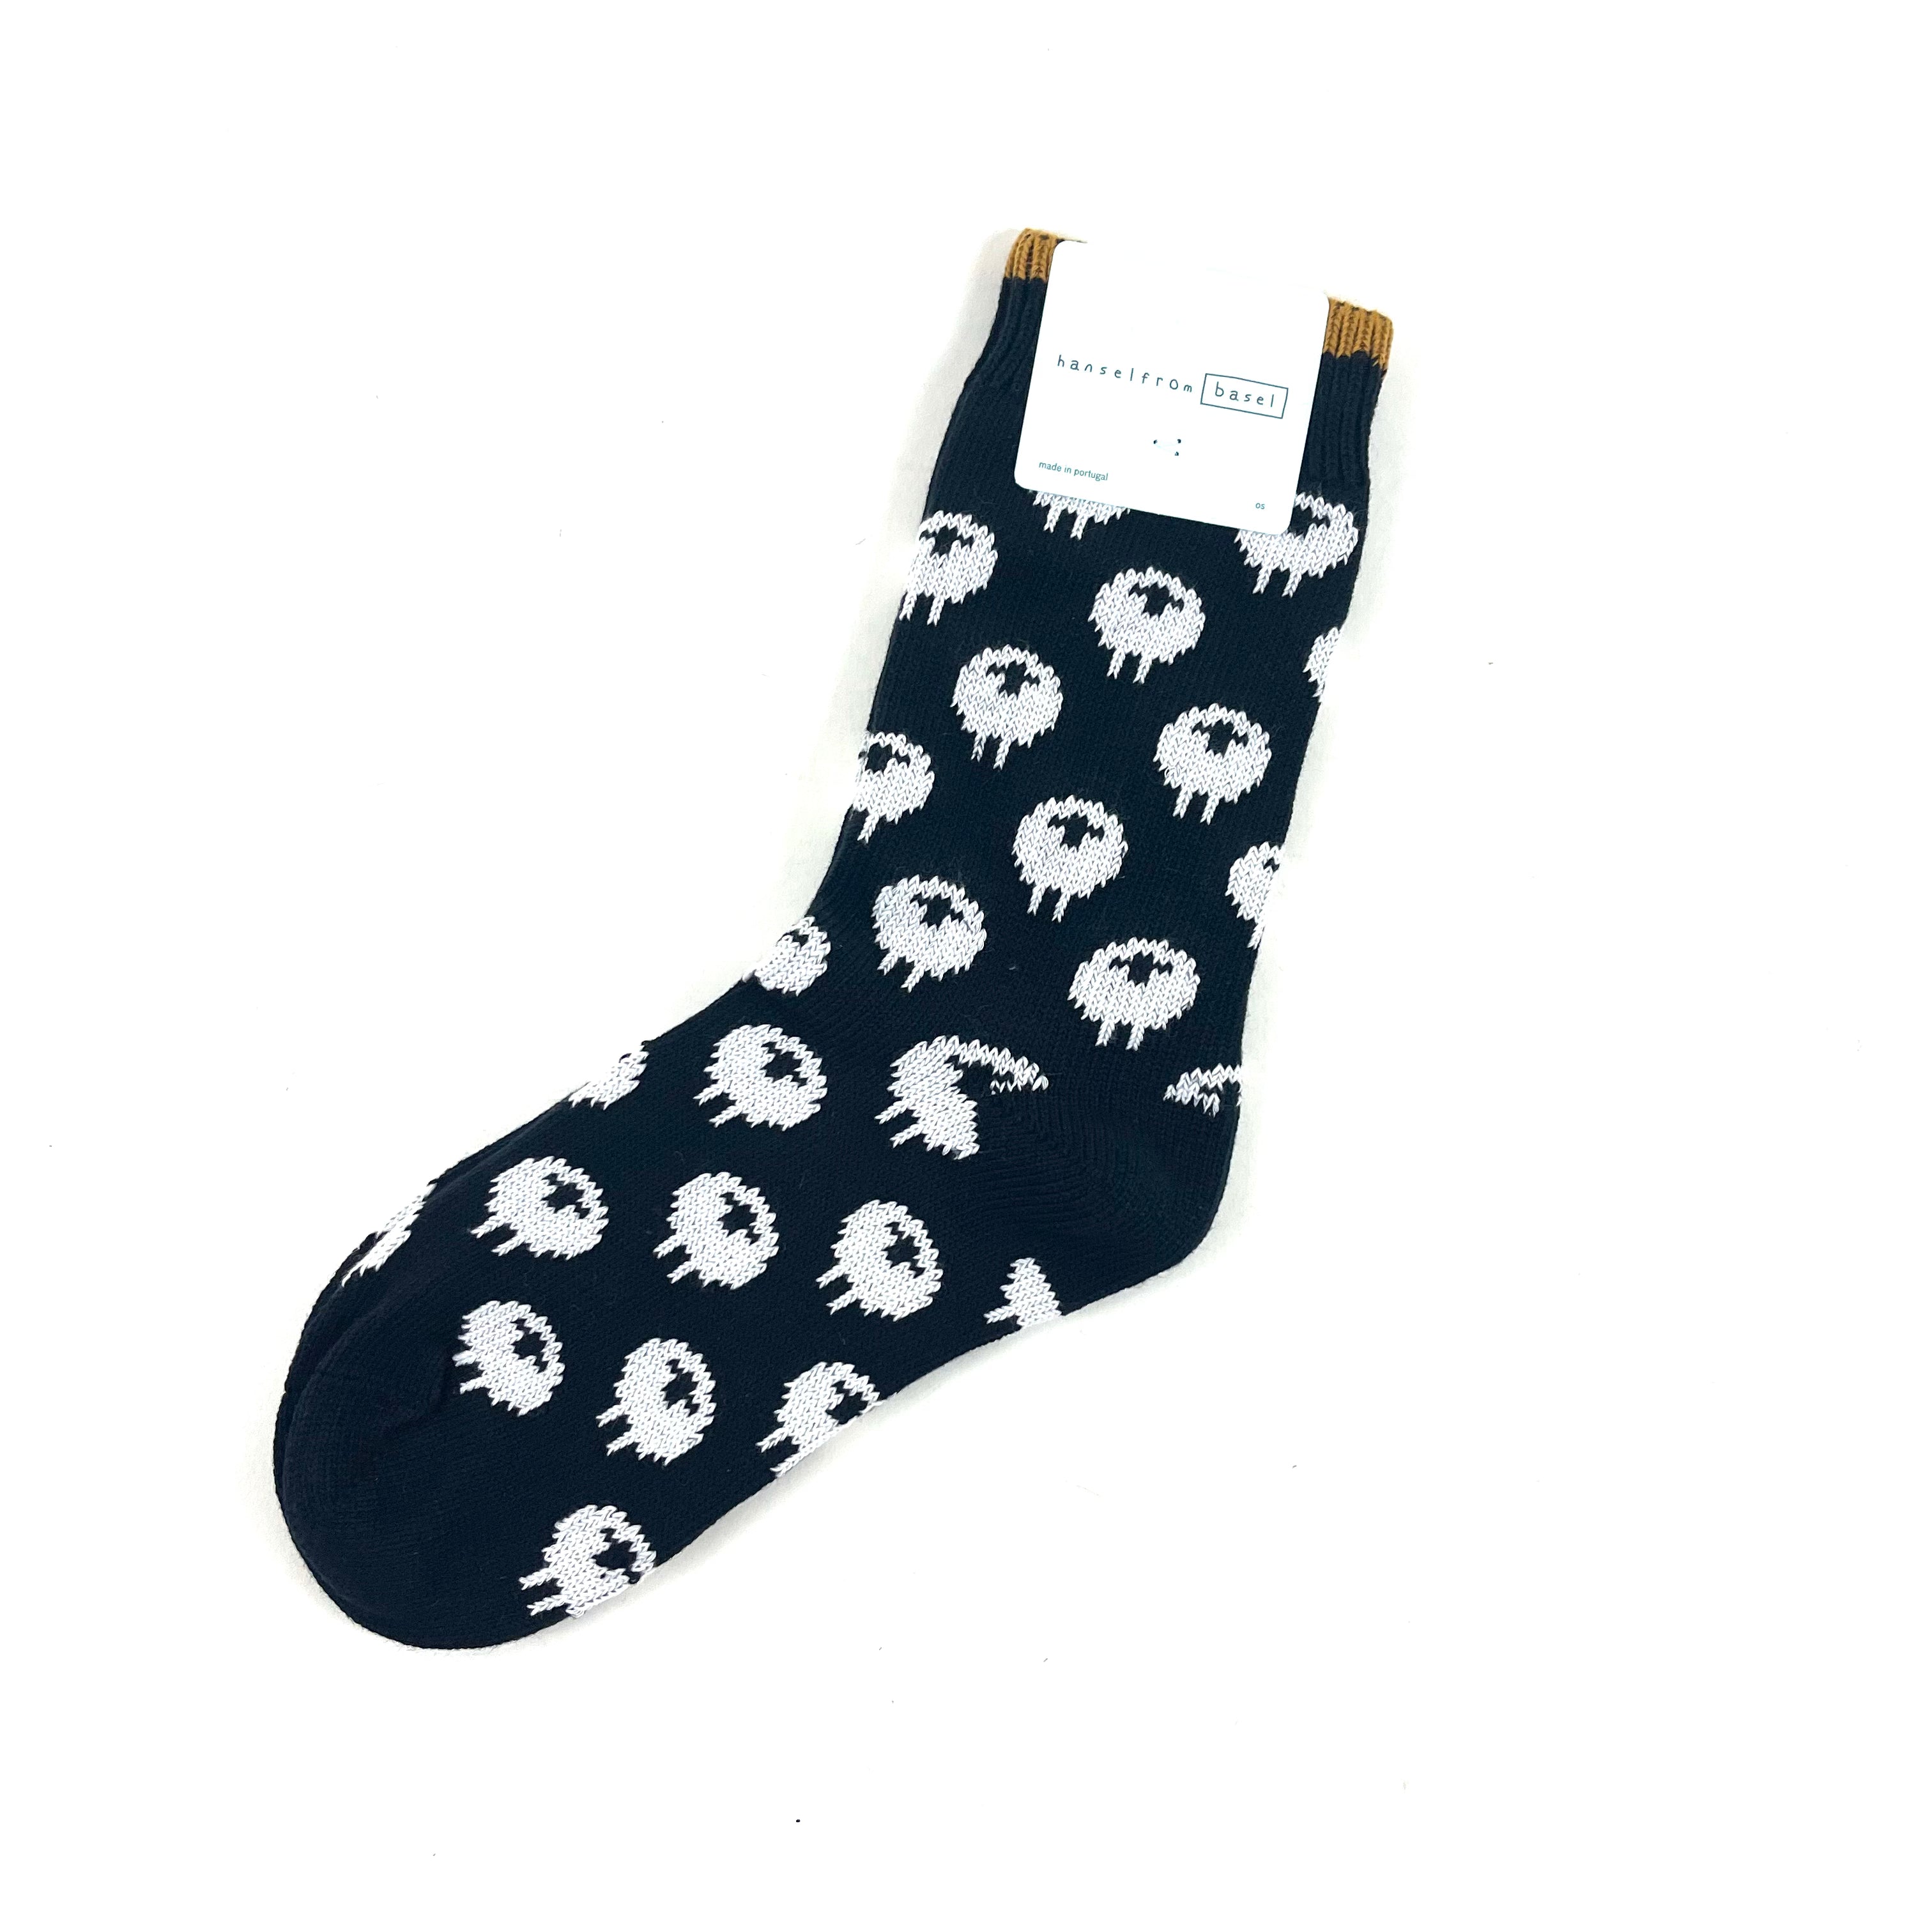 Hansel from Basel - Raining Cats and Dogs Crew Socks